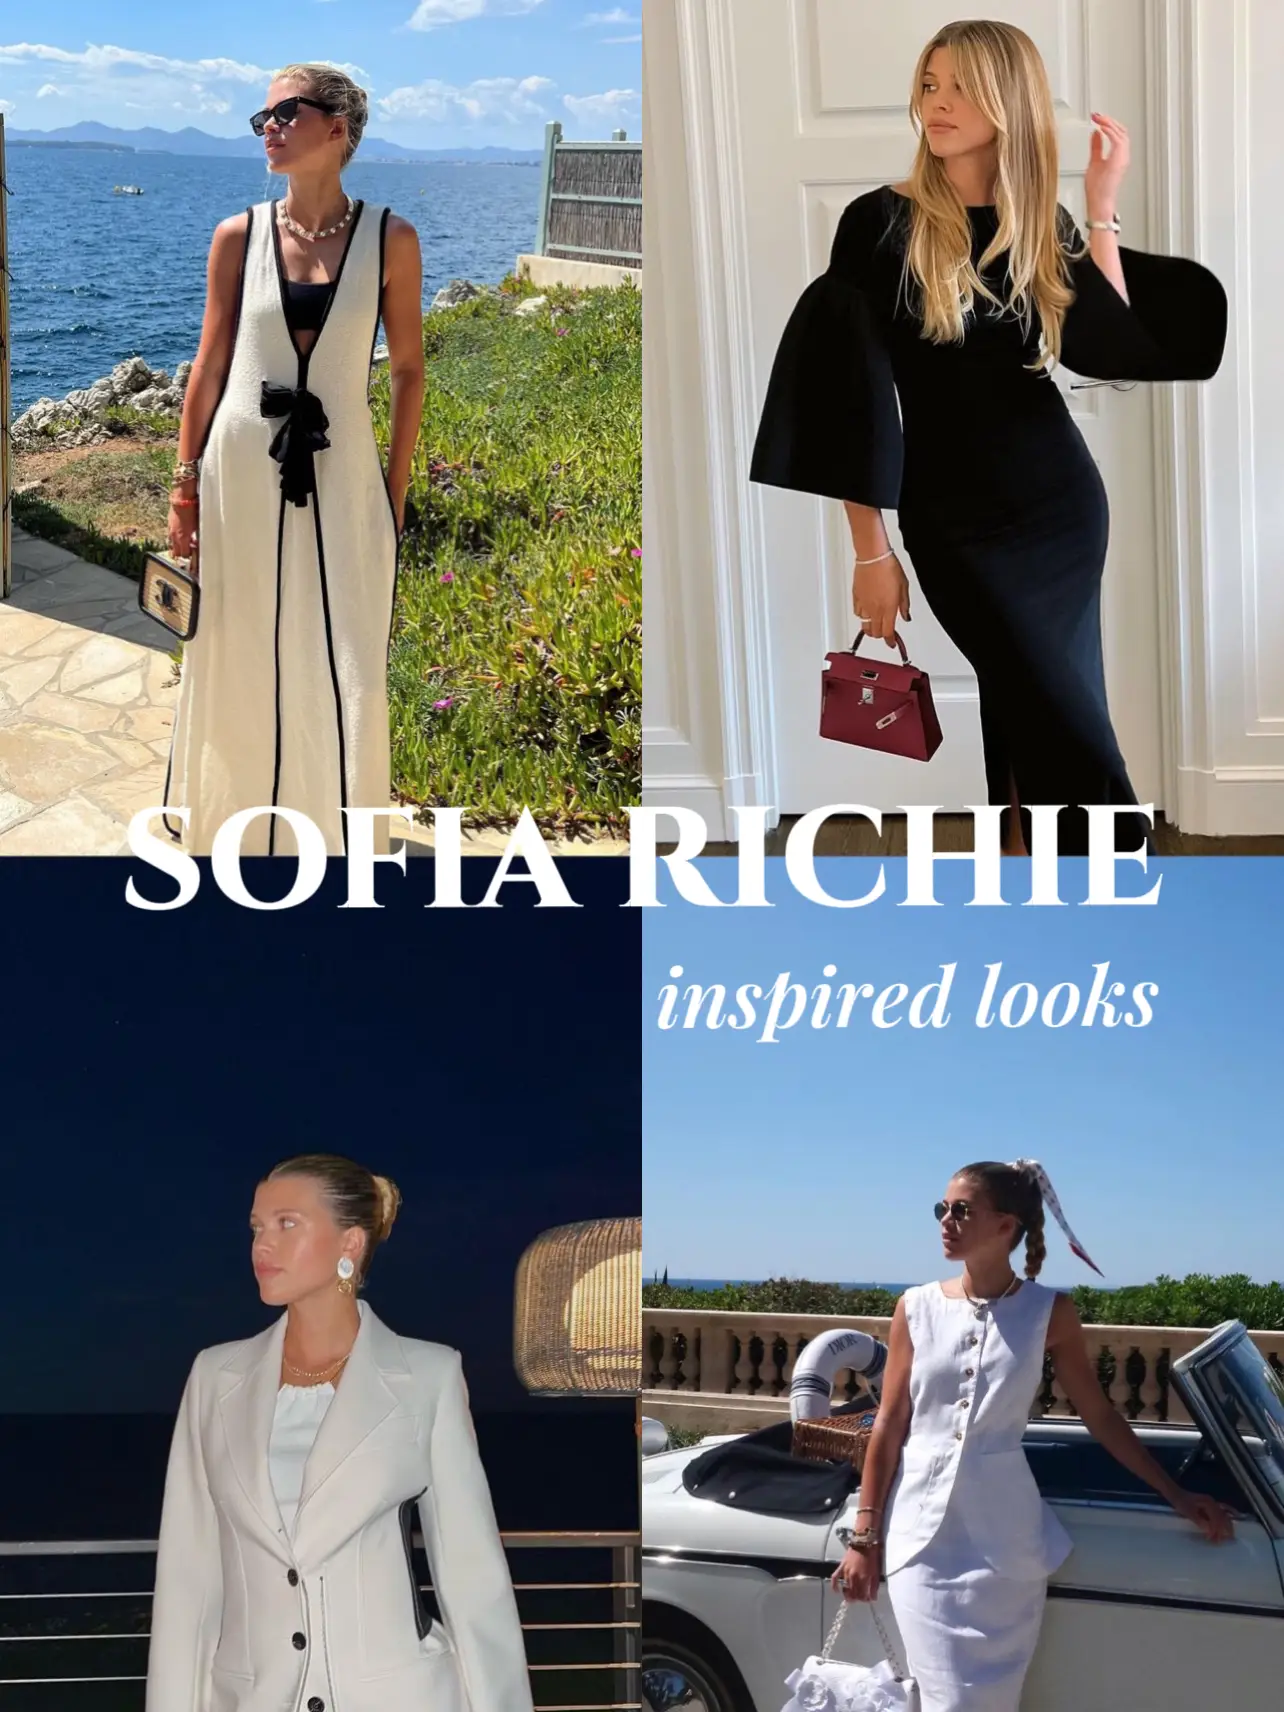 Sofia Richie Inspired Looks 🐚, Gallery posted by Hollie Carson